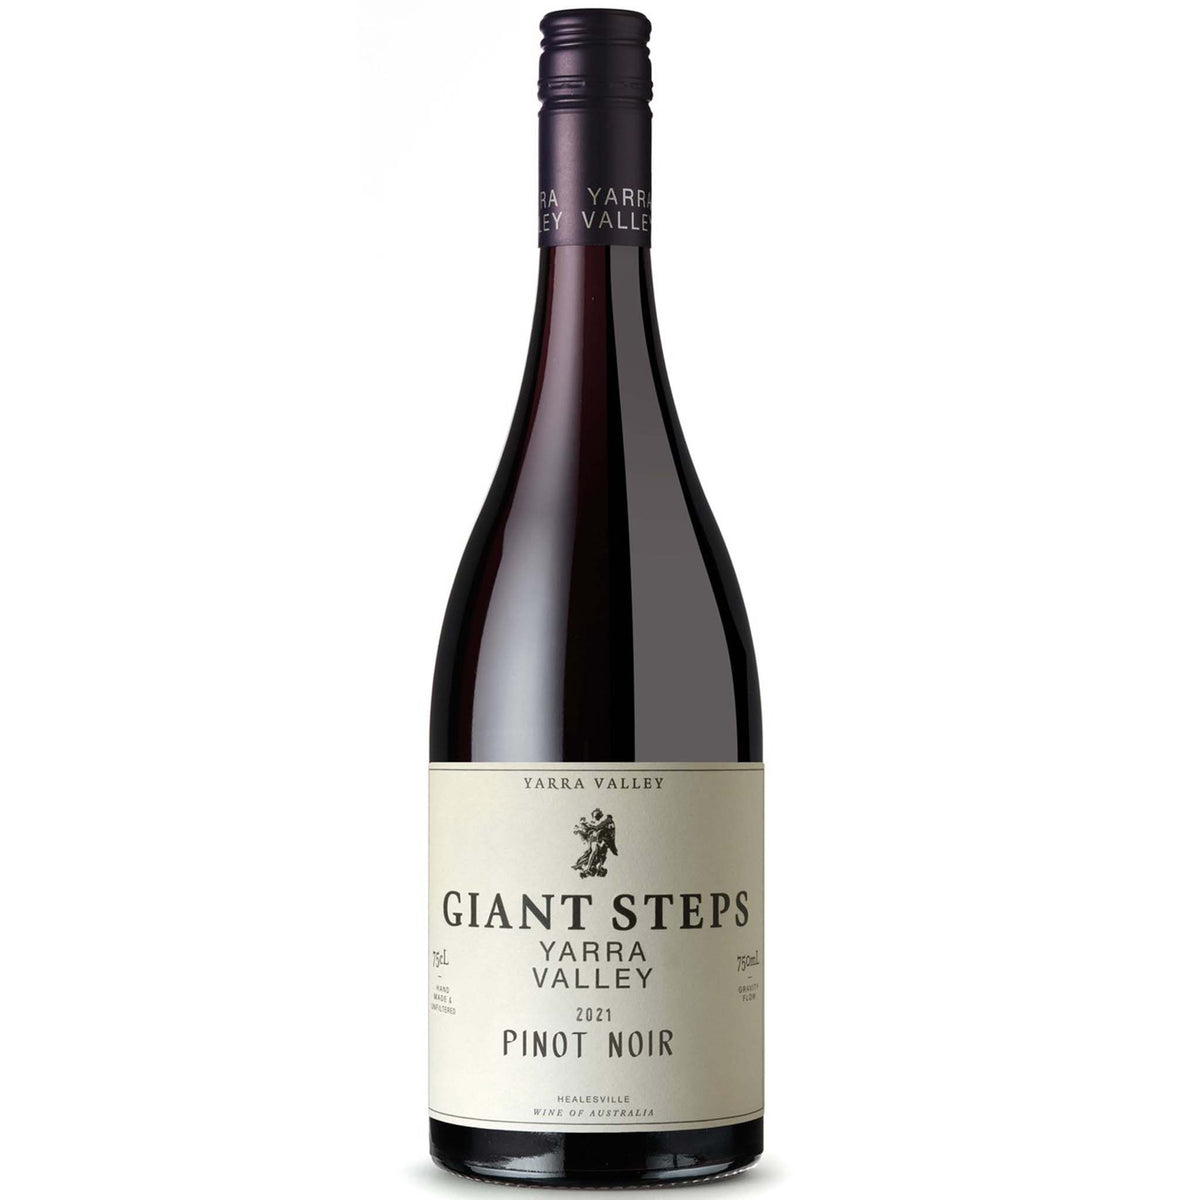 Giant-Steps-Yarra-Valley-Pinot-Noir-2021